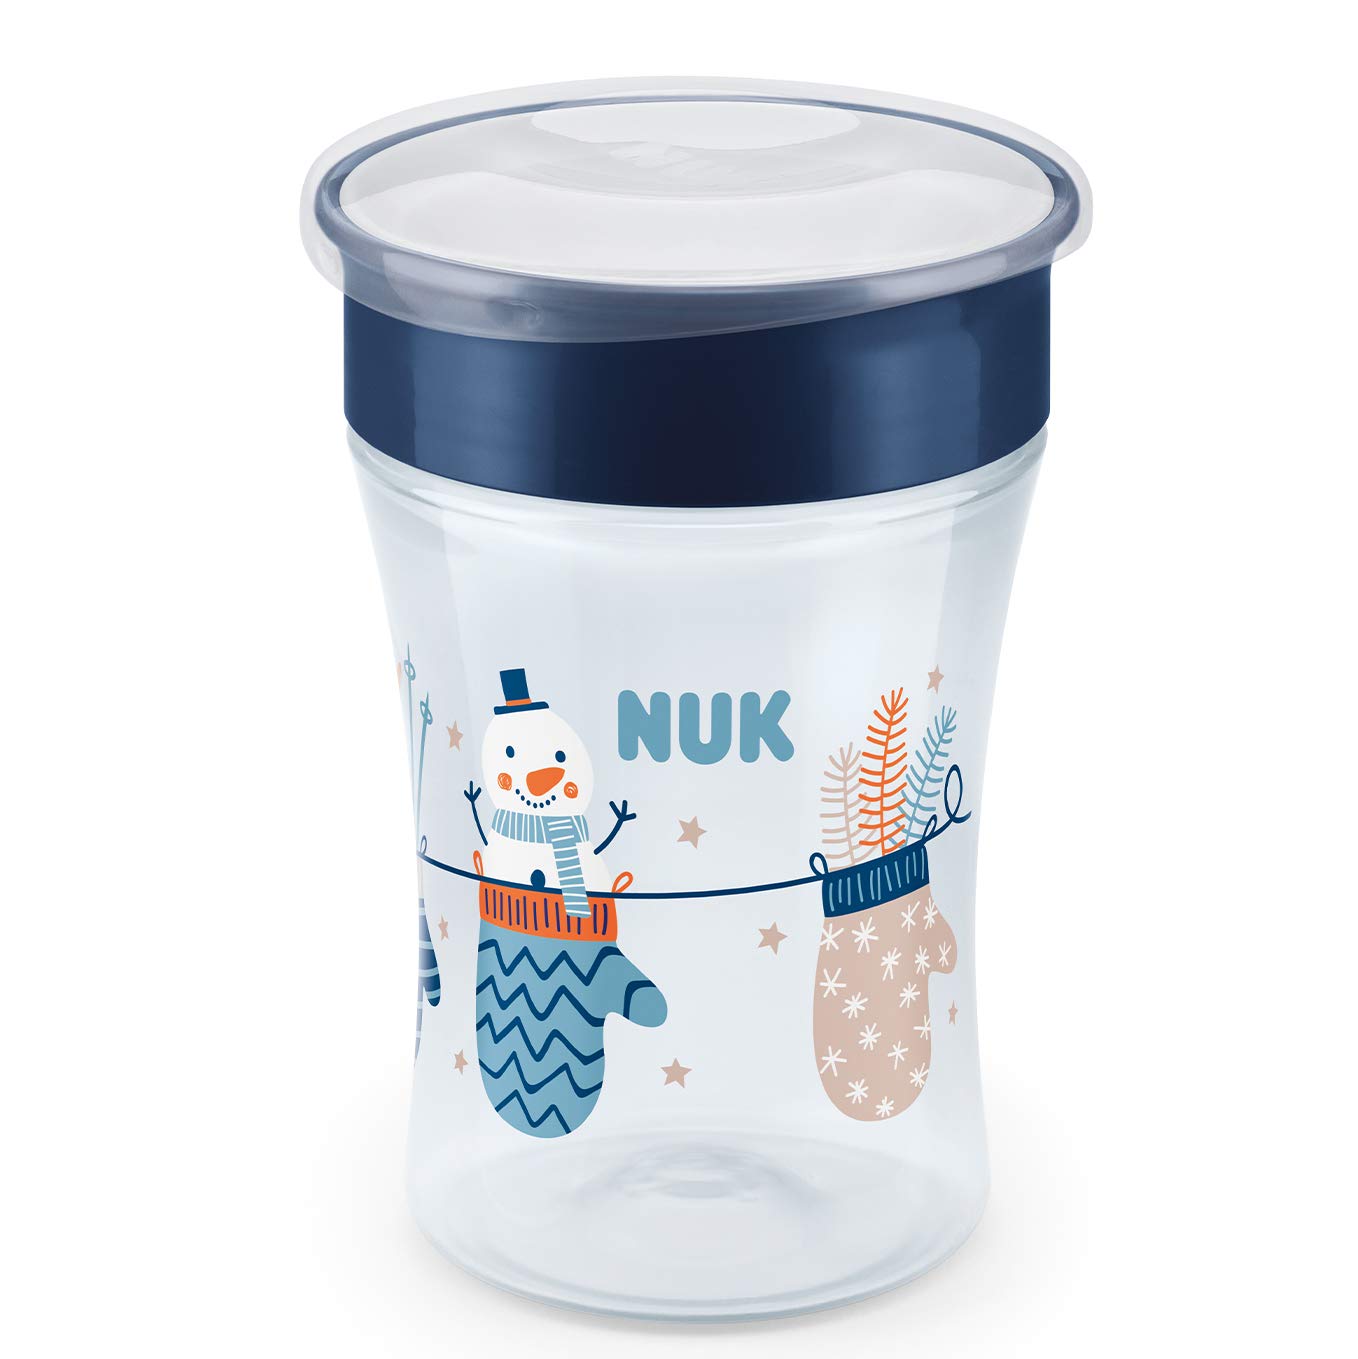 NUK Magic Drinking Cup Blue (winter edition)